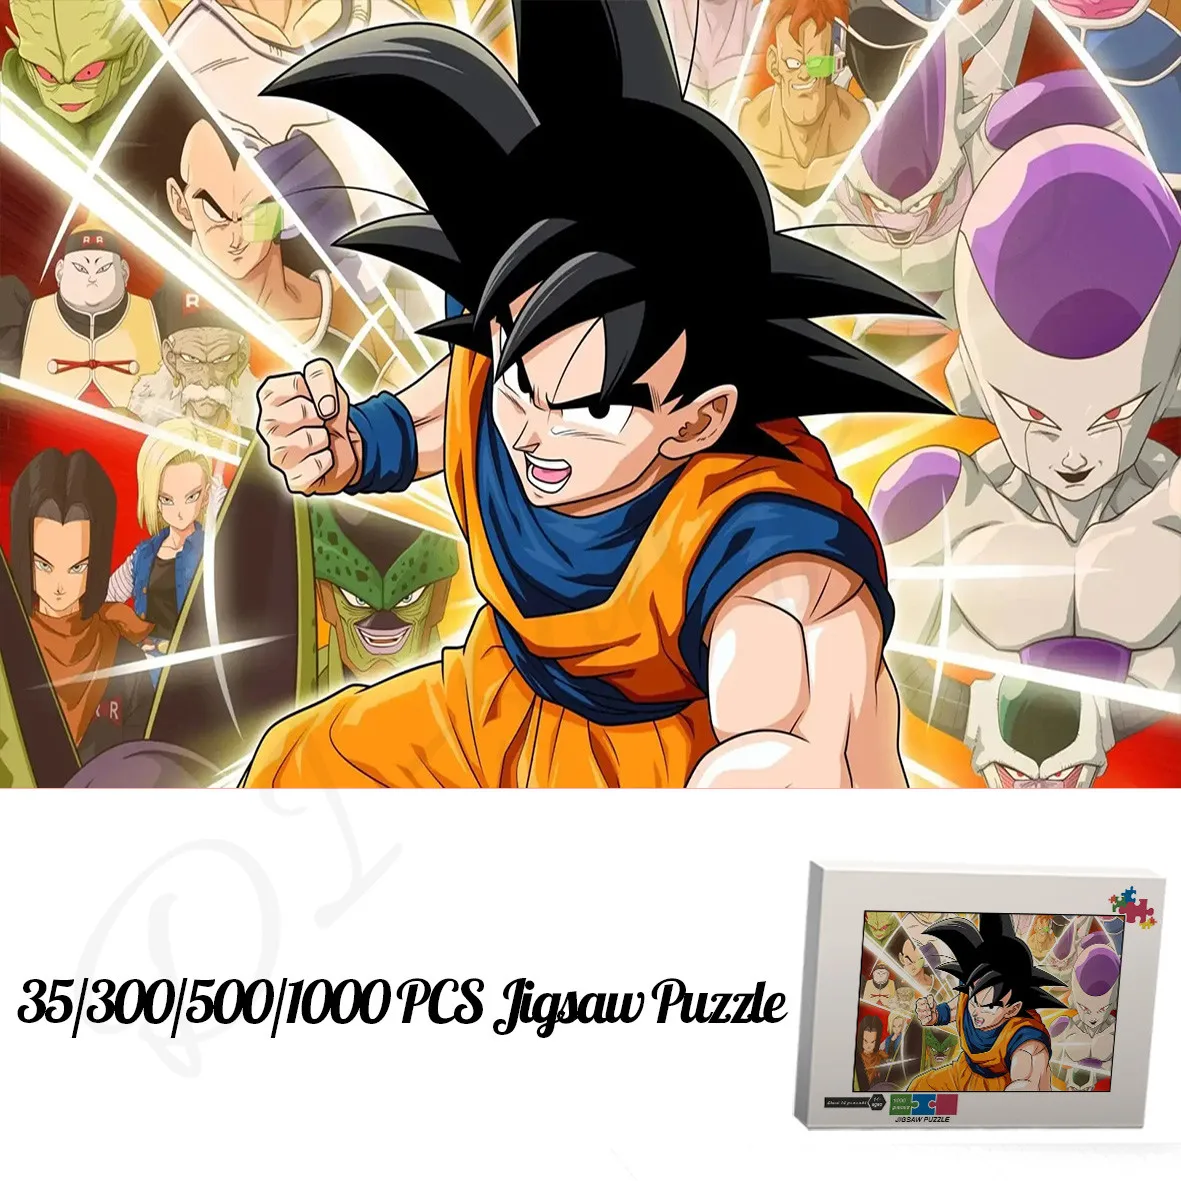 50 70cm jigsaw puzzles 1000 pieces adorable dogs wooden assembling puzzles picture thicken puzzles toys for adults kids games Goku Jigsaw Puzzles for Kids and Adults Classic Anime Dragon Ball 1000 Pieces Wooden Puzzles Educational Toys for Entertainment